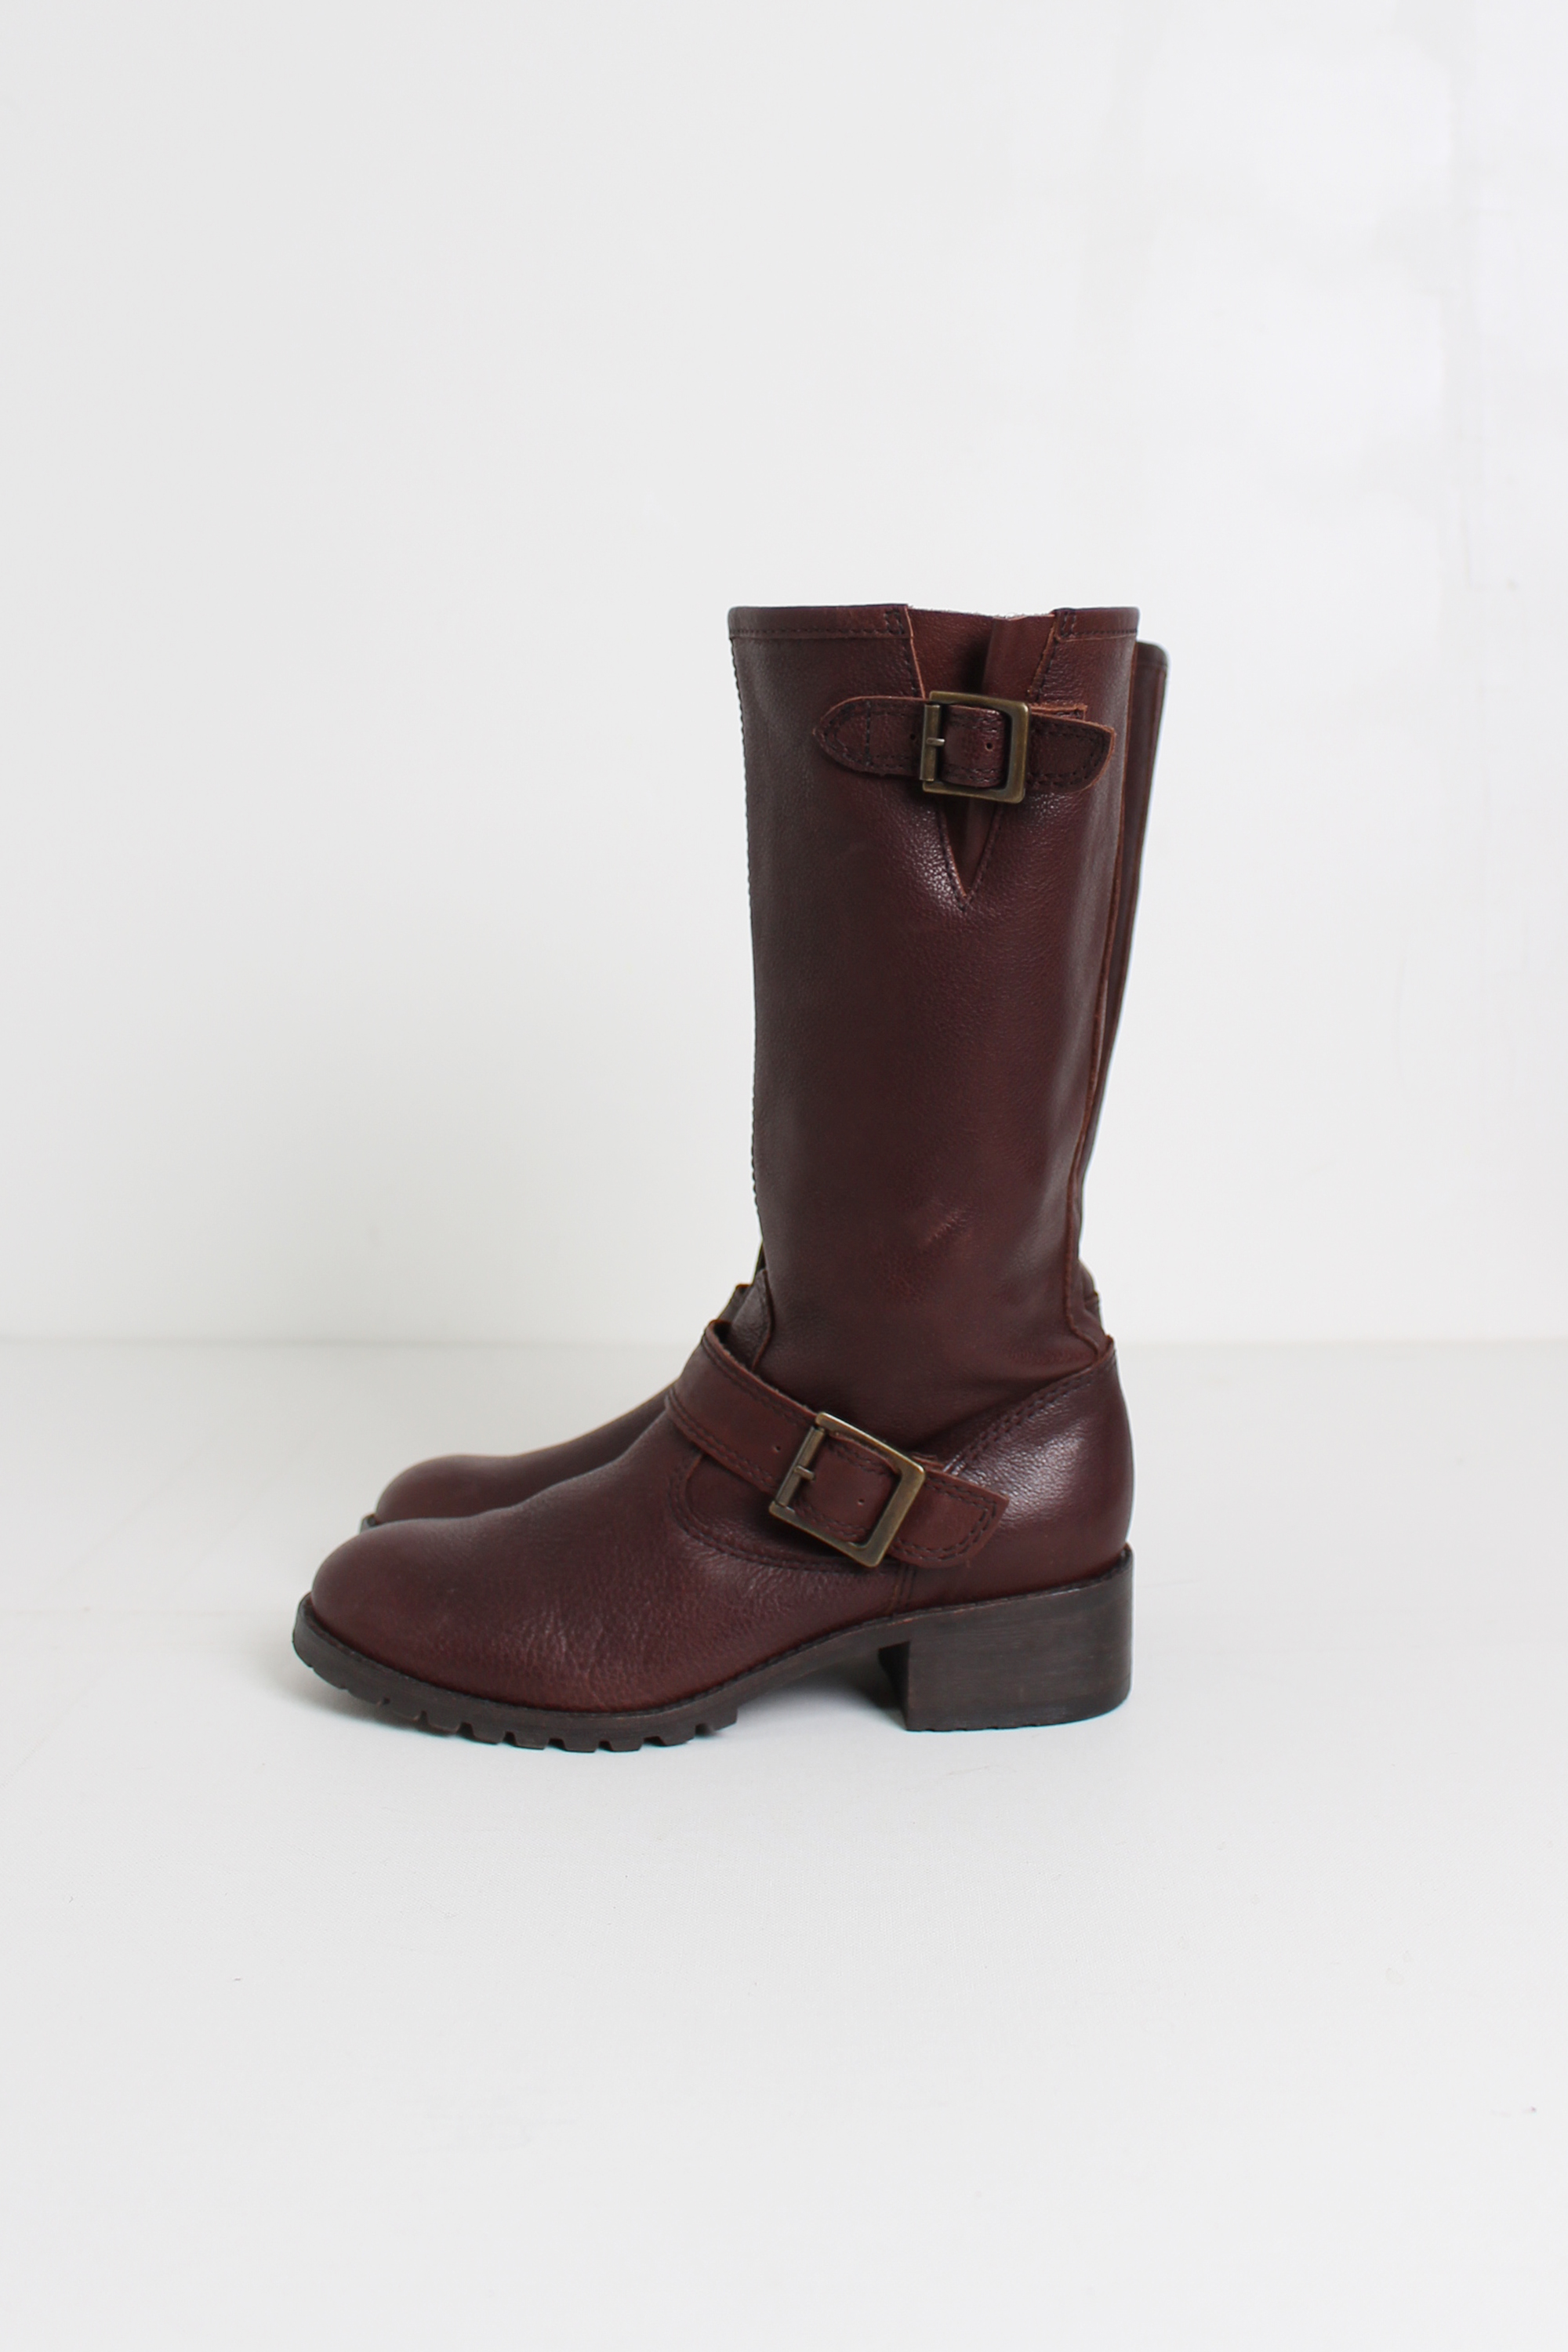 ing leather boots